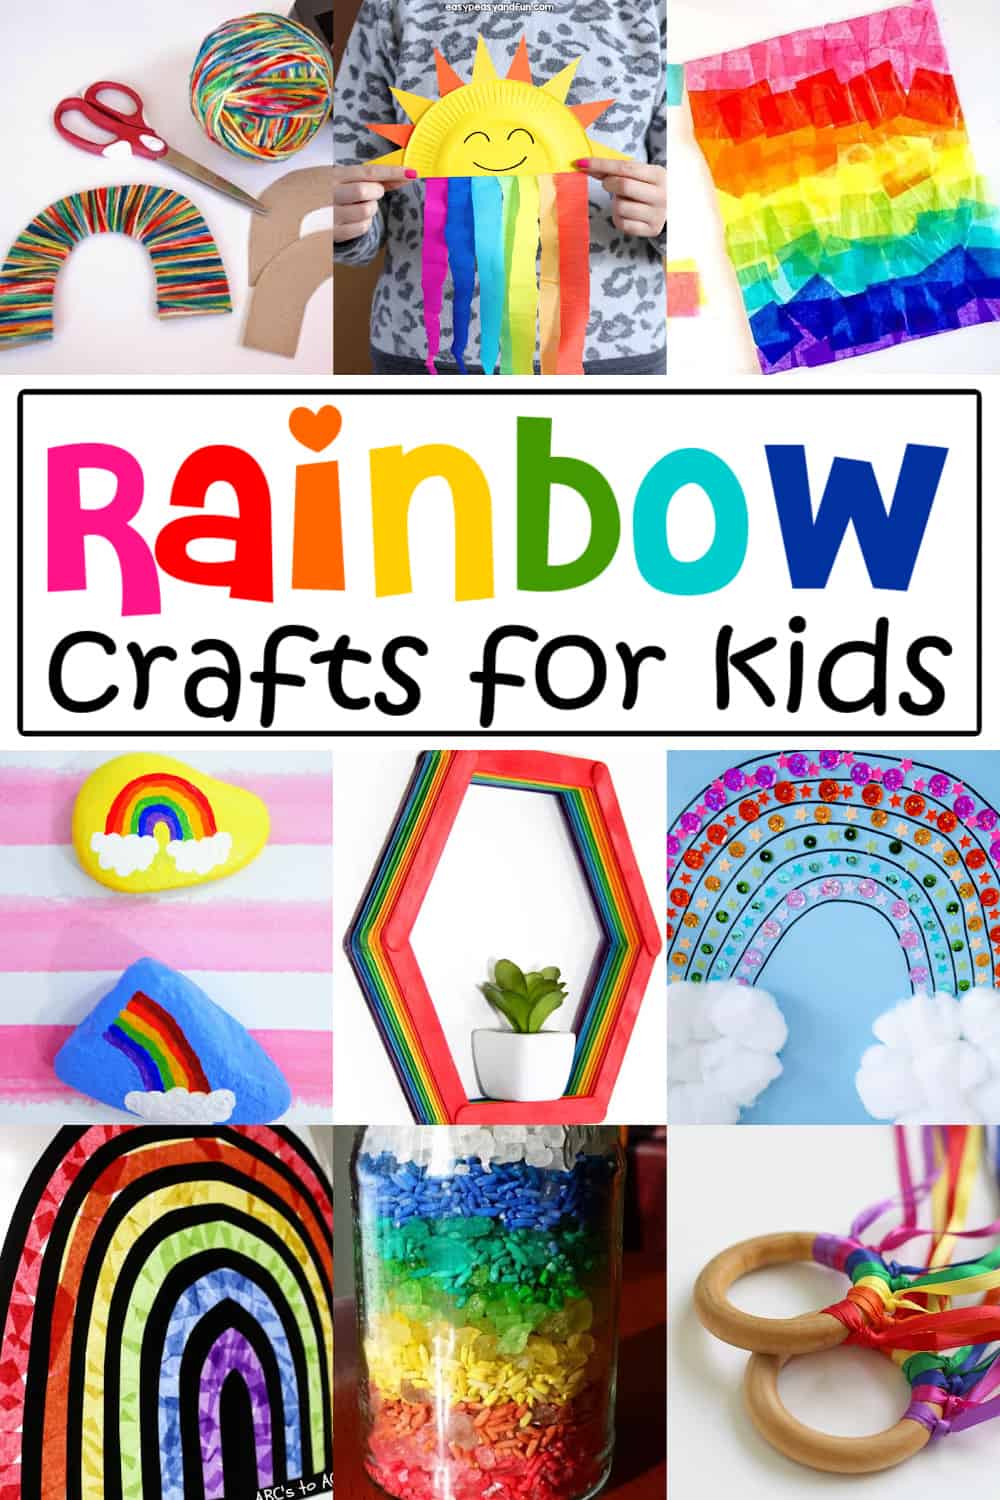 35 Winter Art Projects and Fun Winter Crafts - Little Bins for Little Hands